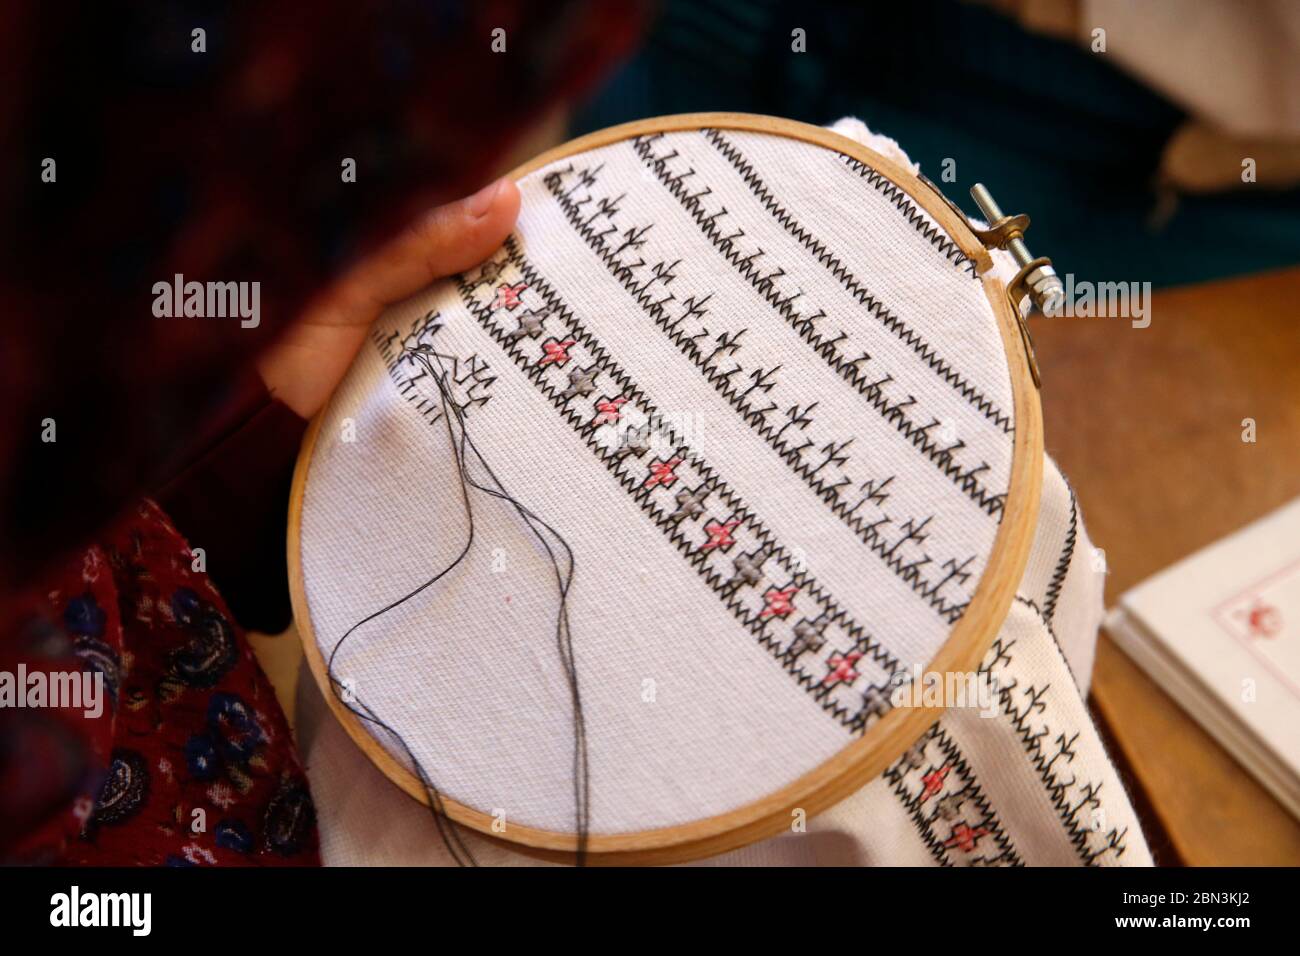 Vocational training in Mohammedia catholic church, Morocco. Embroidery. Stock Photo